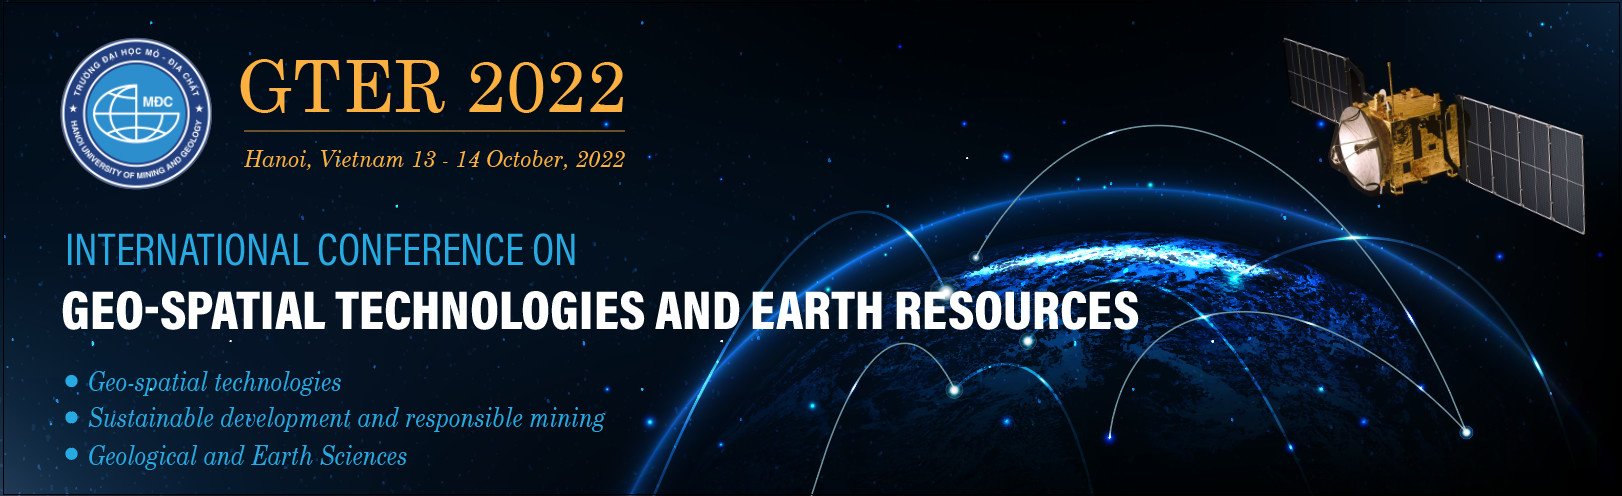 International Conference on Geo-Spatial Technologies and Resources -GTER 2022